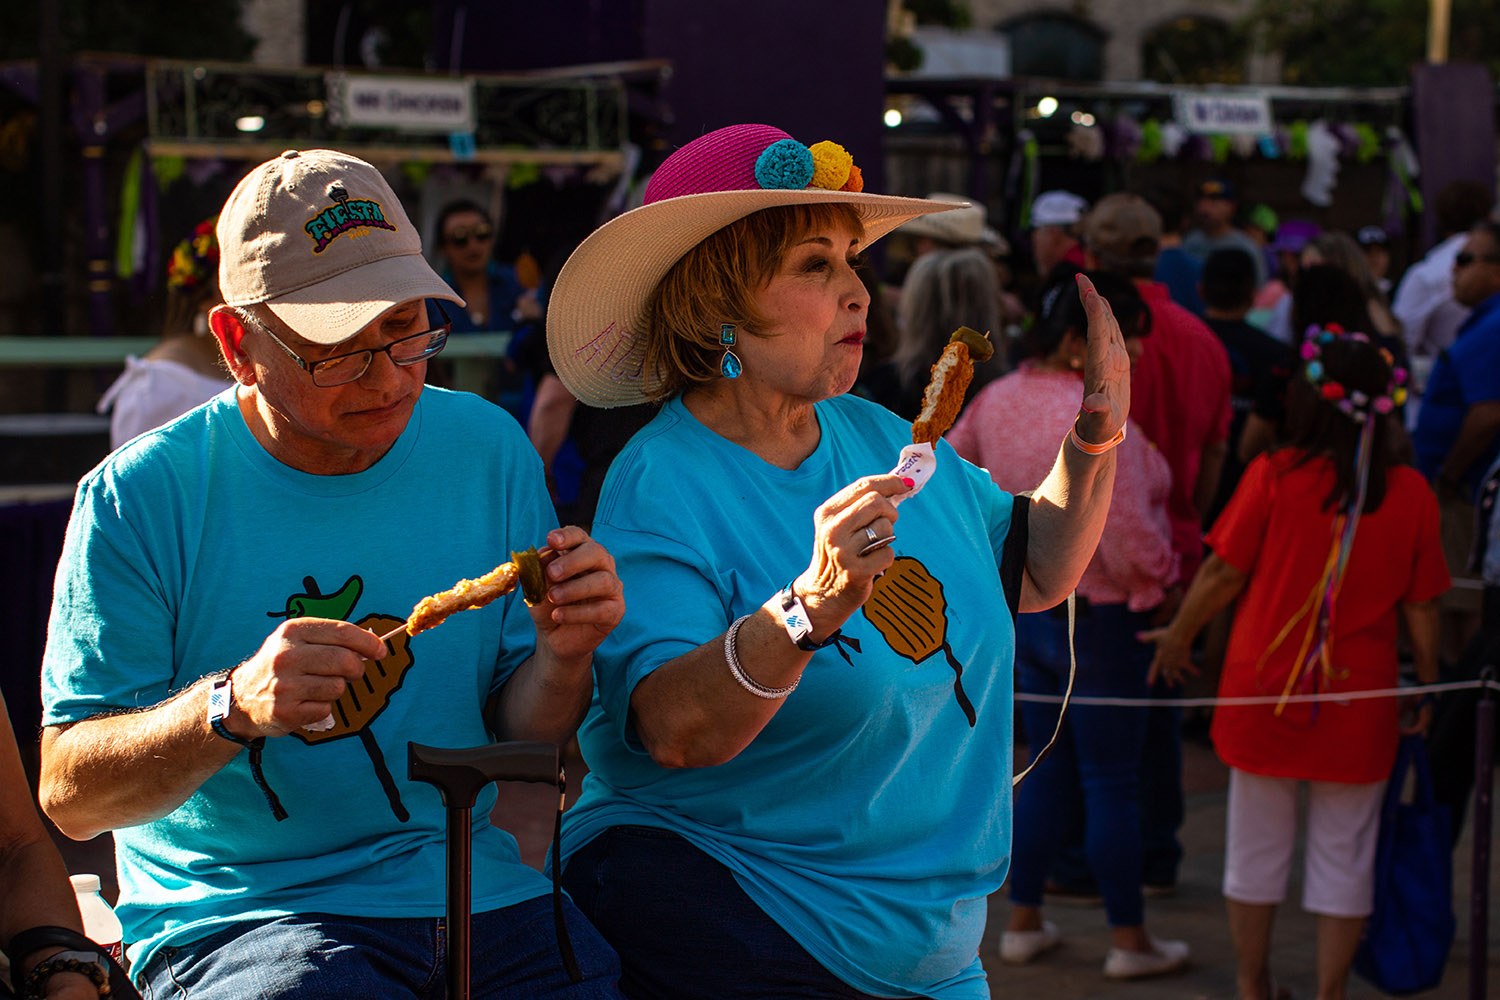 Daniel and Elizabeth Ruiz enjoy a chicken-on-a-stick during the second night of A Night in Old San Antonio, or NIOSA, during Fiesta on Wednesday, April 6, 2022, at La Villita in downtown San Antonio, Texas. Photo by Kaylee Greenlee Beal | Heron contributor